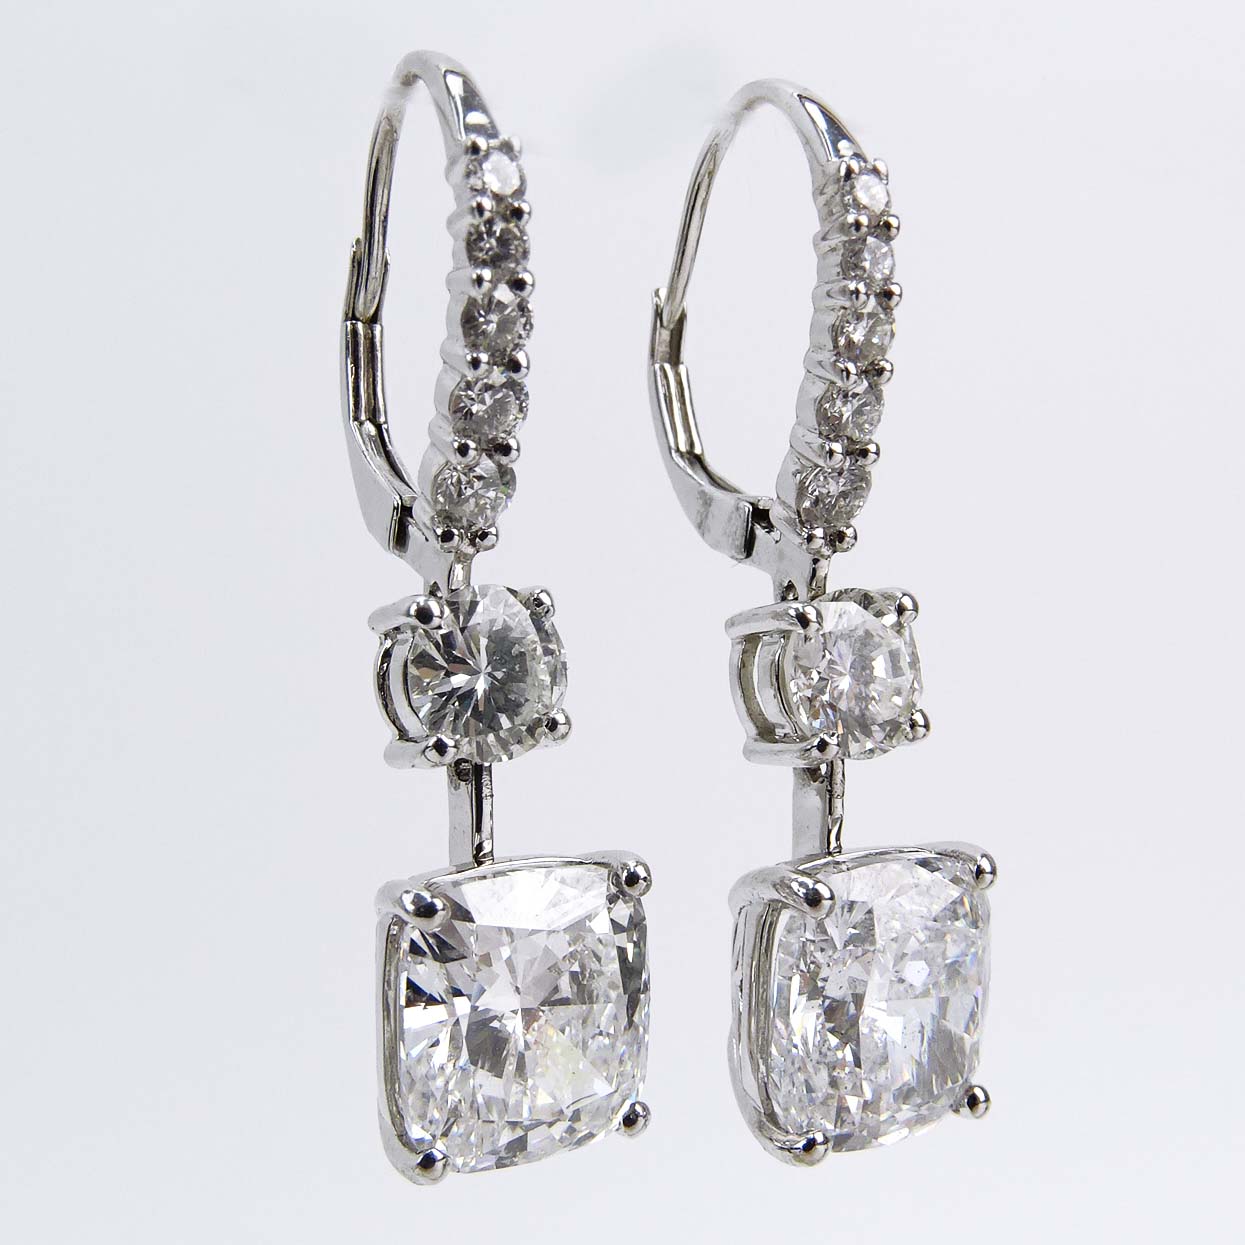 GIA Certified Approx. 7.07  Carat TW Cushion Cut Diamond and 18 Karat White Gold Pendant Earrings Accented with Round Brilliant Cut Diamonds.